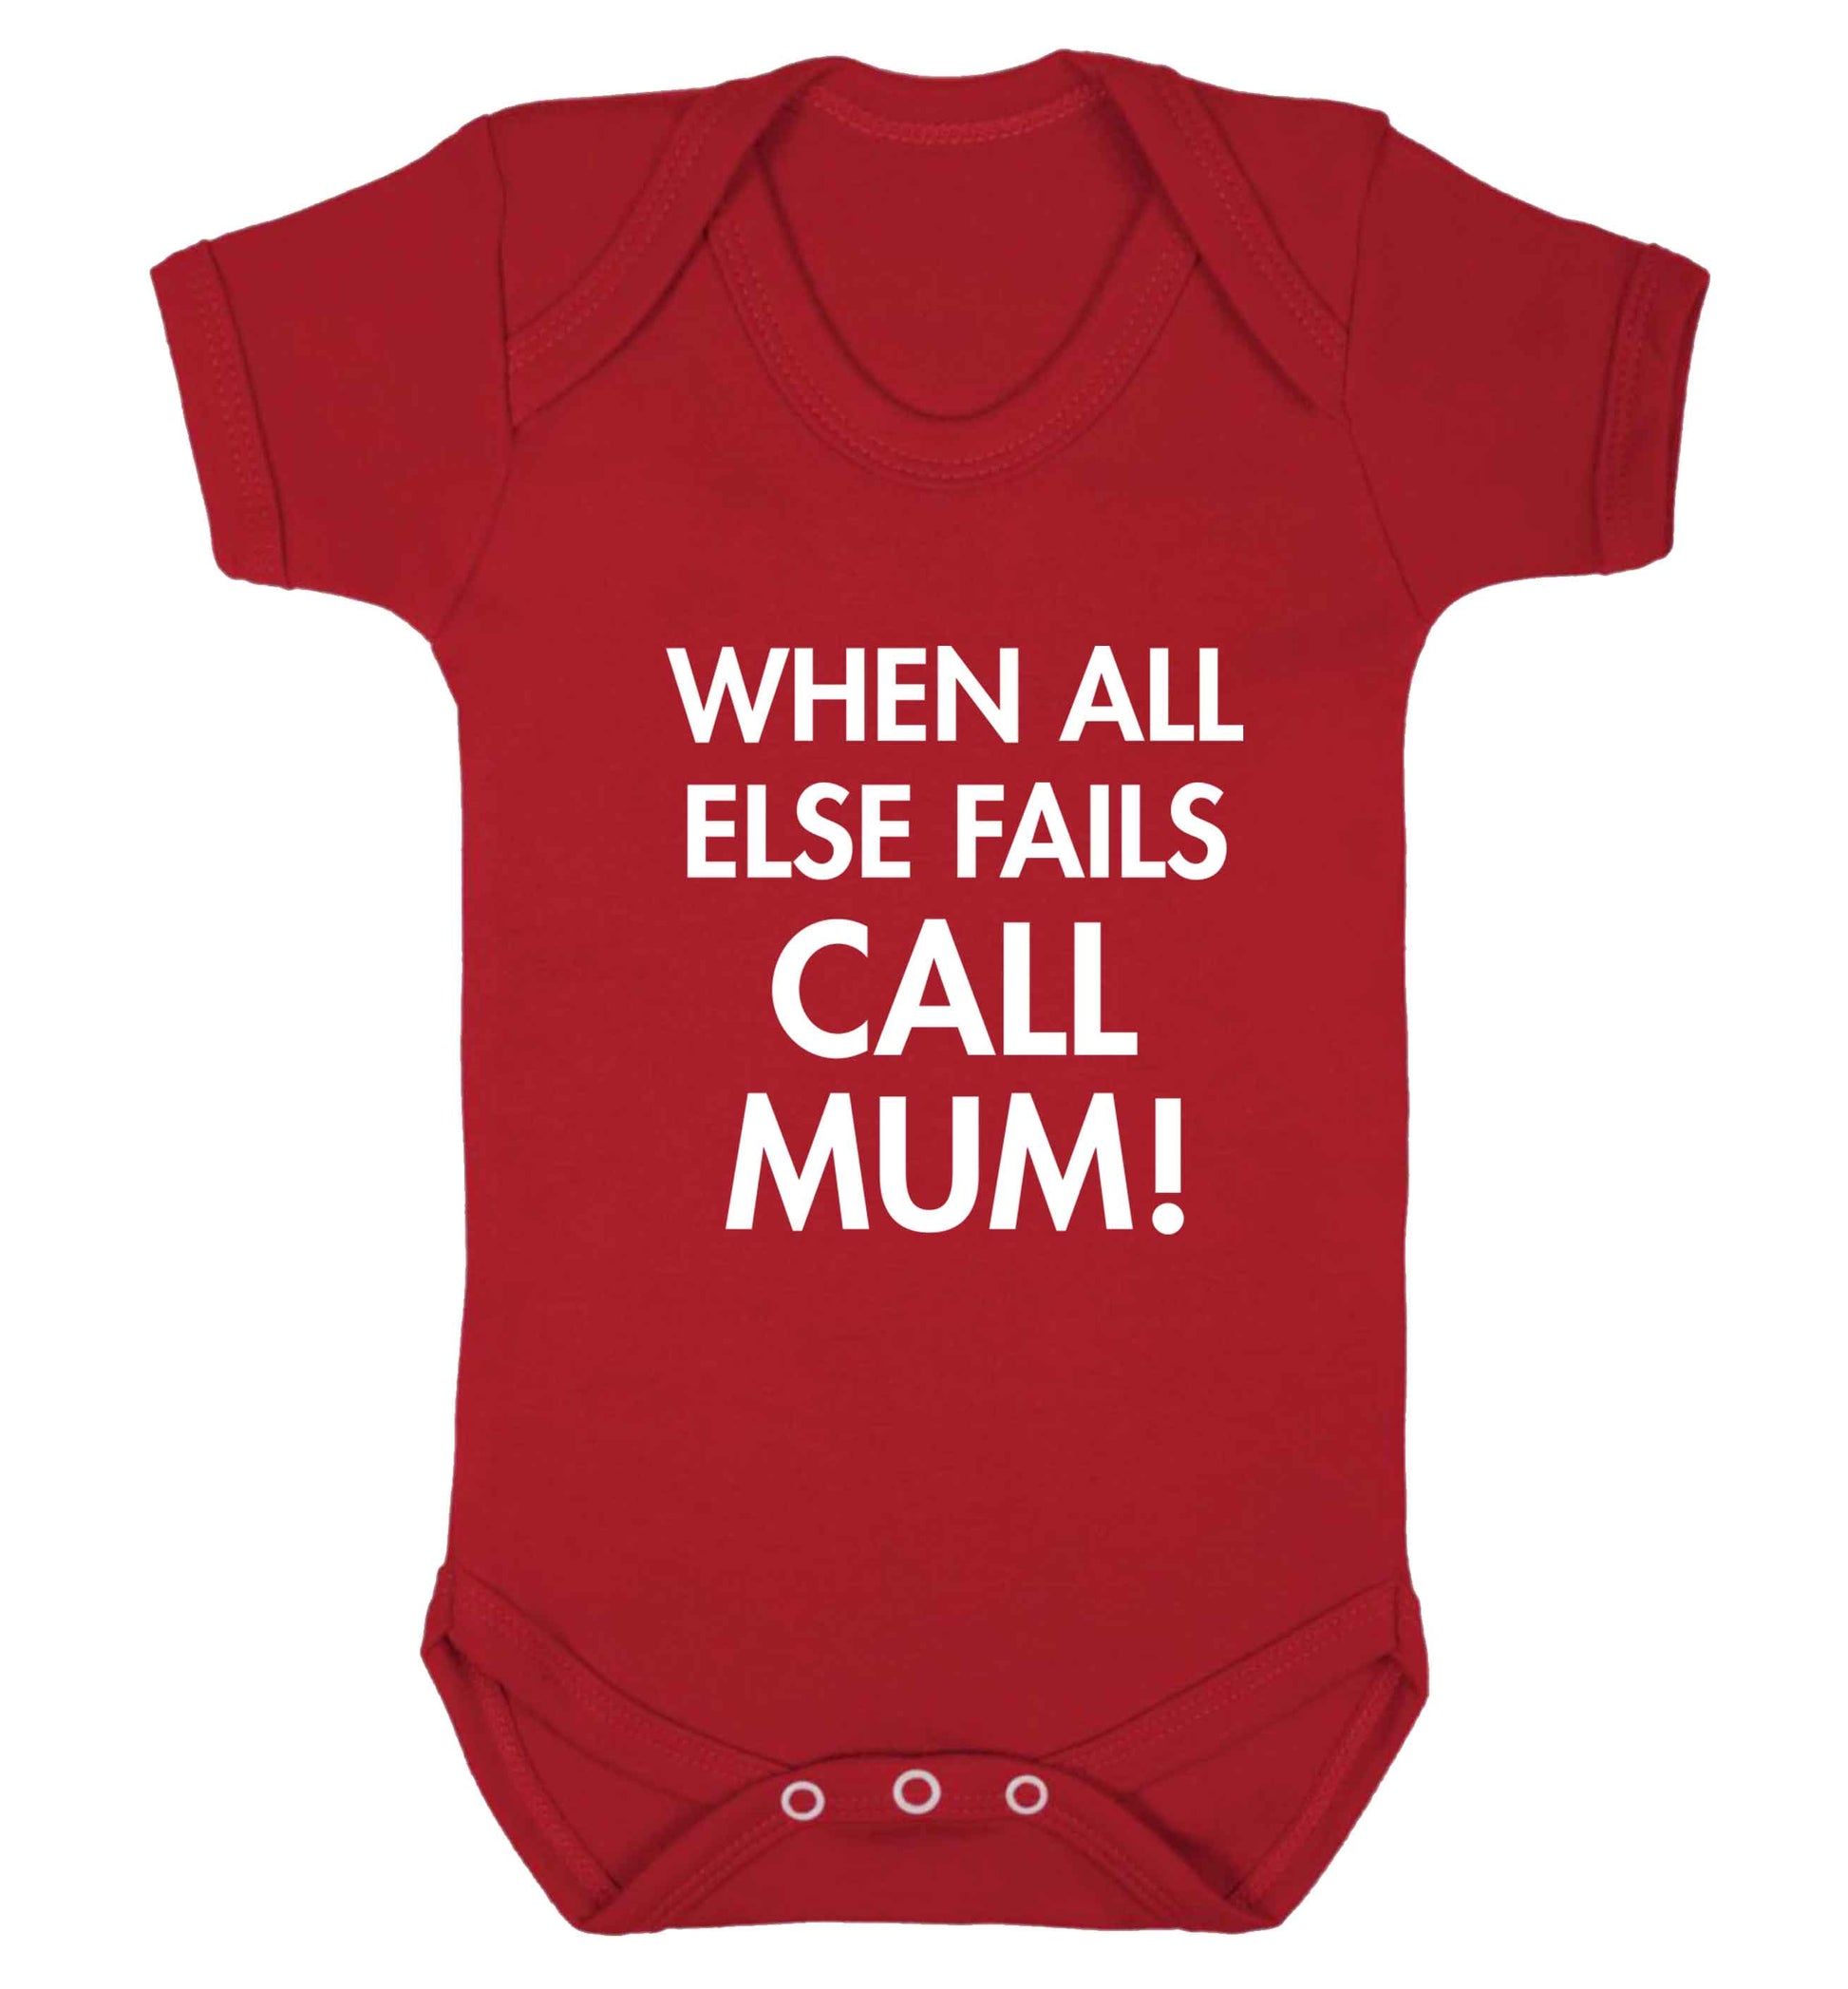 When all else fails call mum! baby vest red 18-24 months